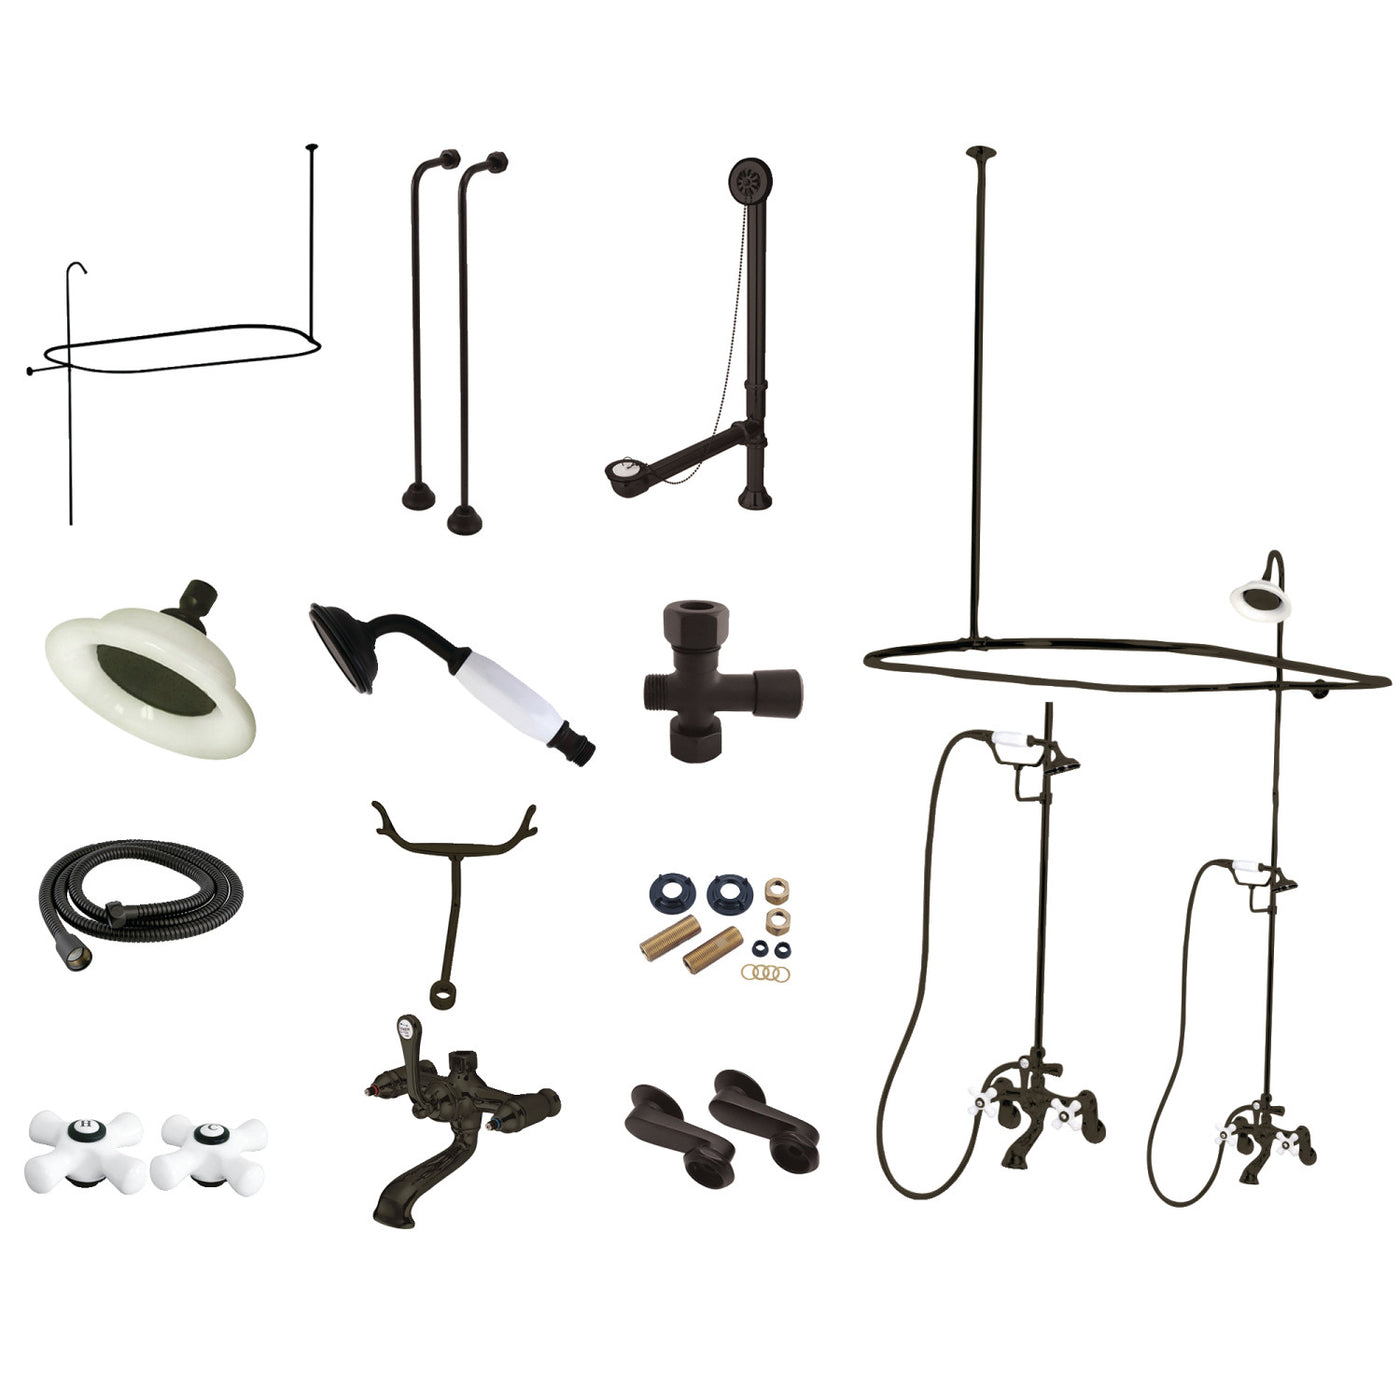 Elements of Design EDK1145PX Clawfoot Tub Faucet Package with Shower Enclosure, Oil Rubbed Bronze